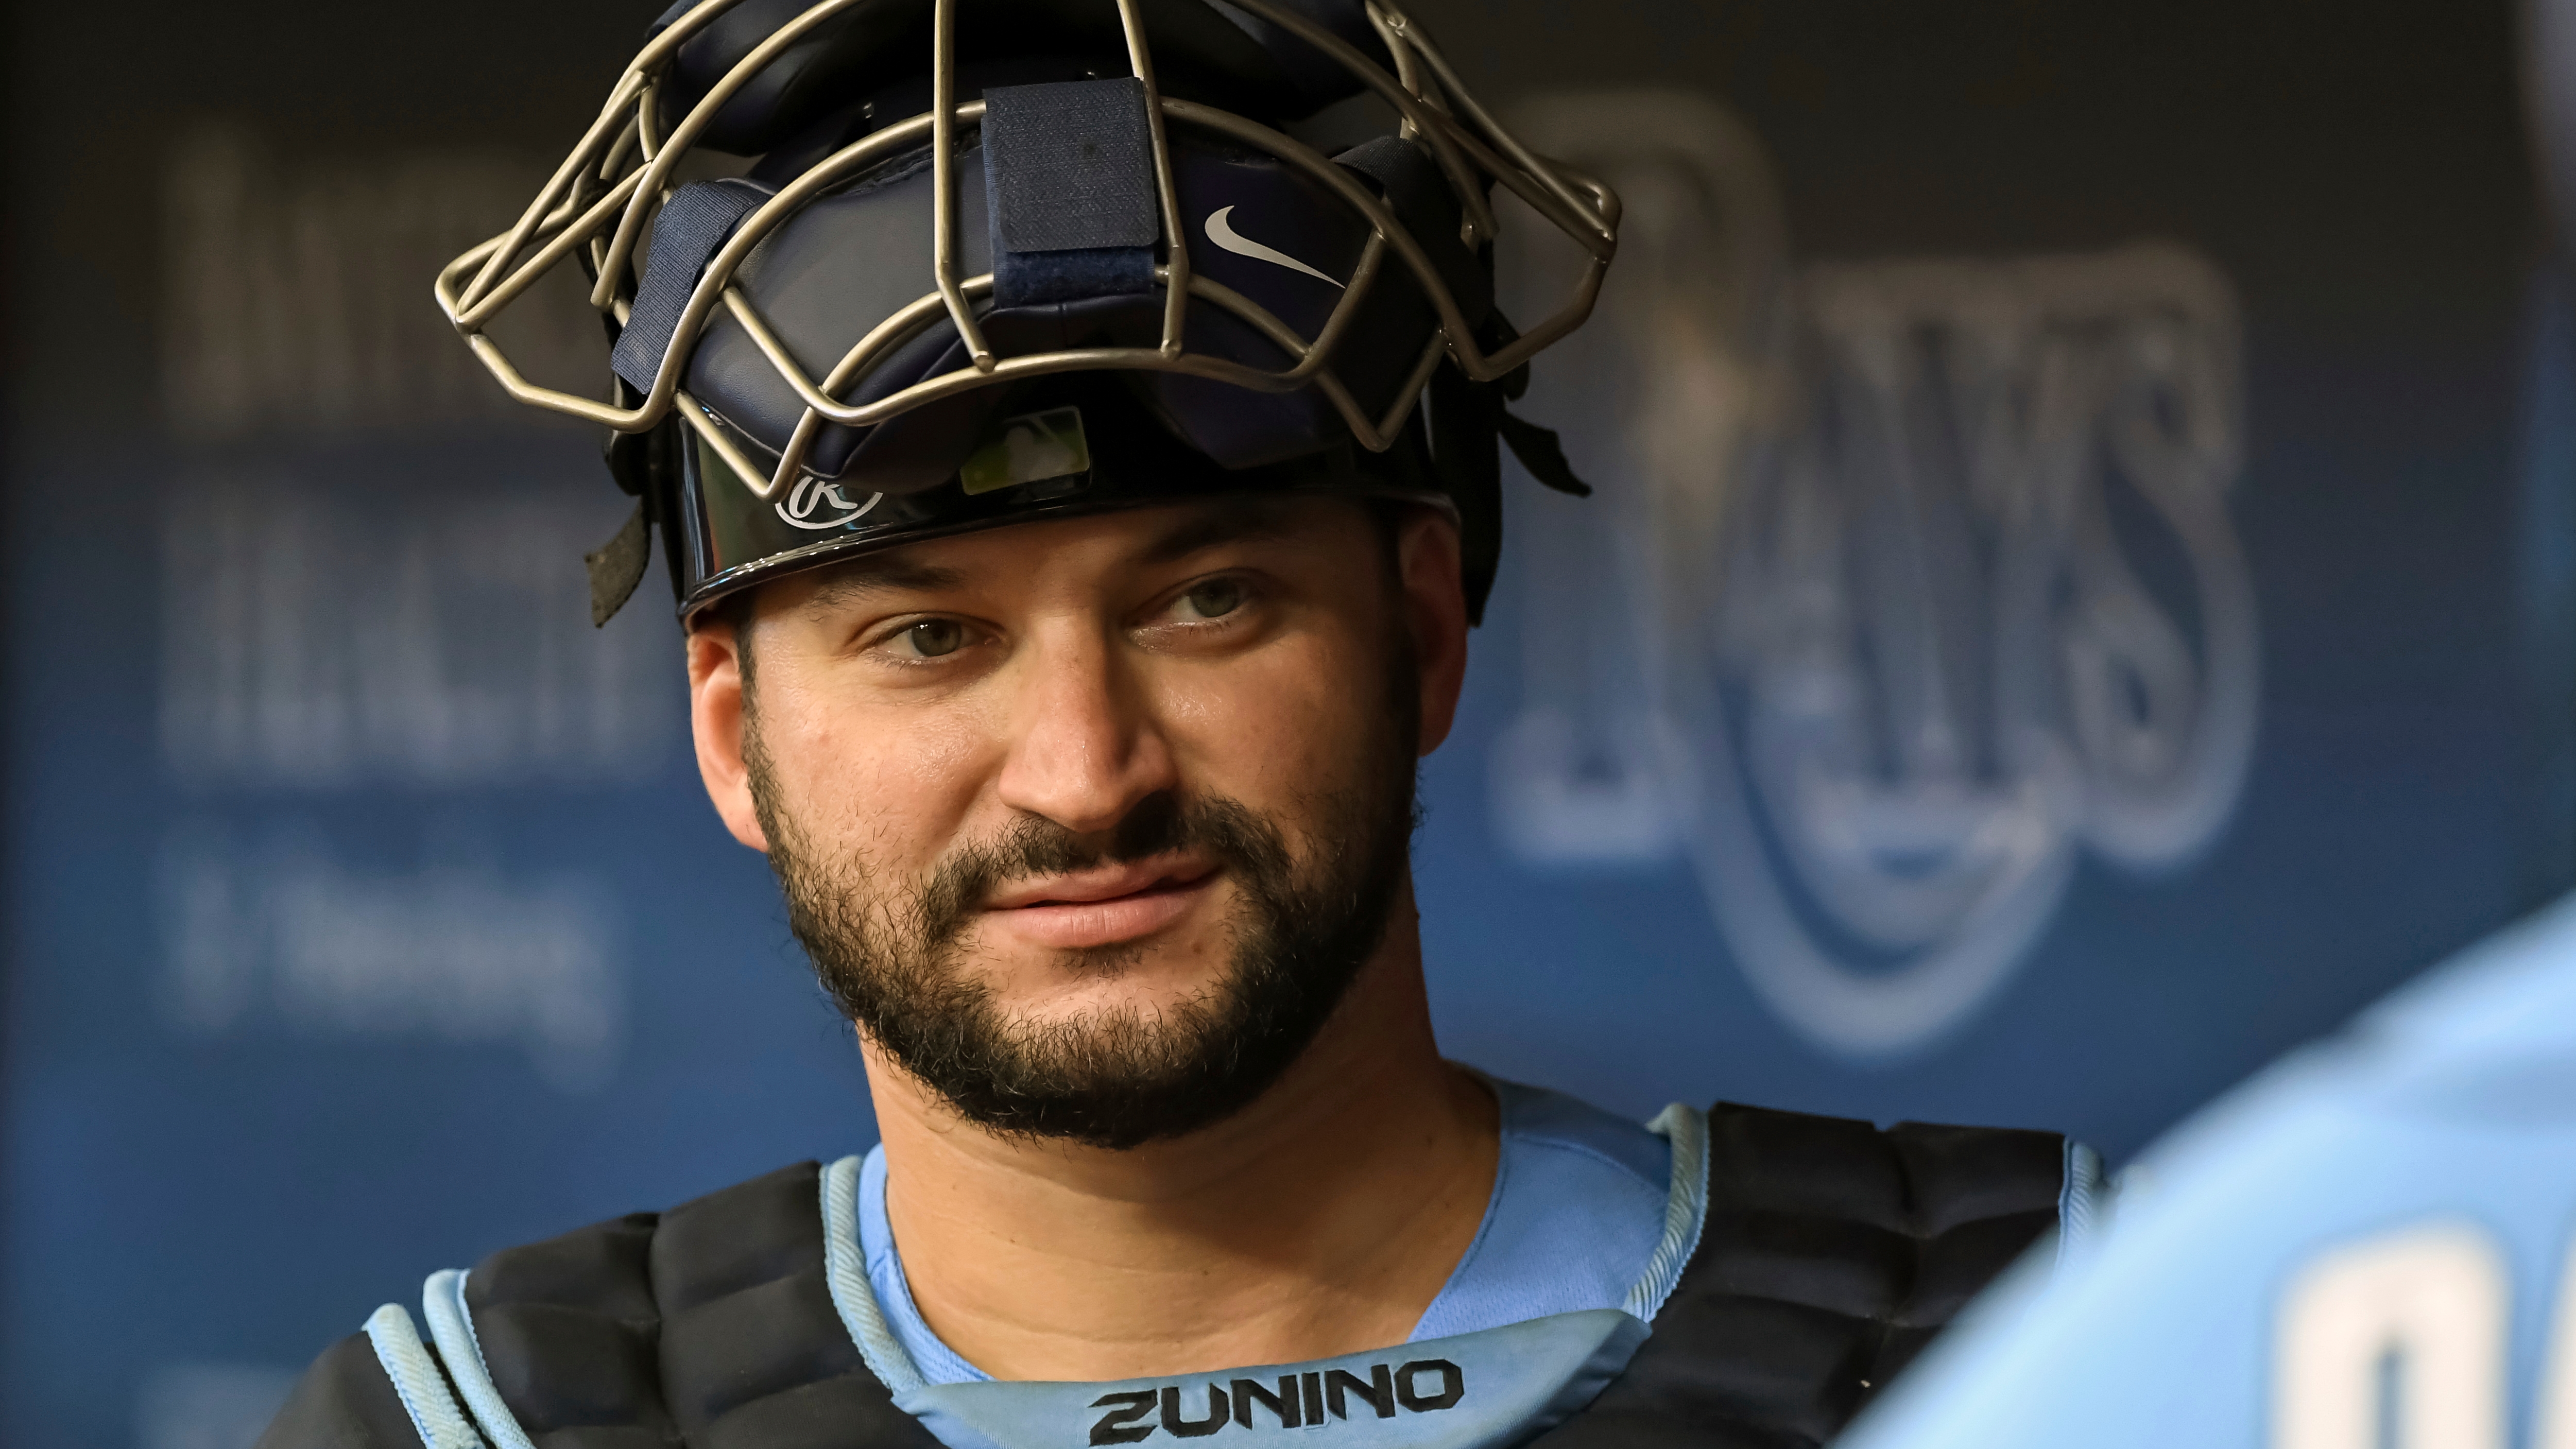 Follow Mike Zunino in the College World Series